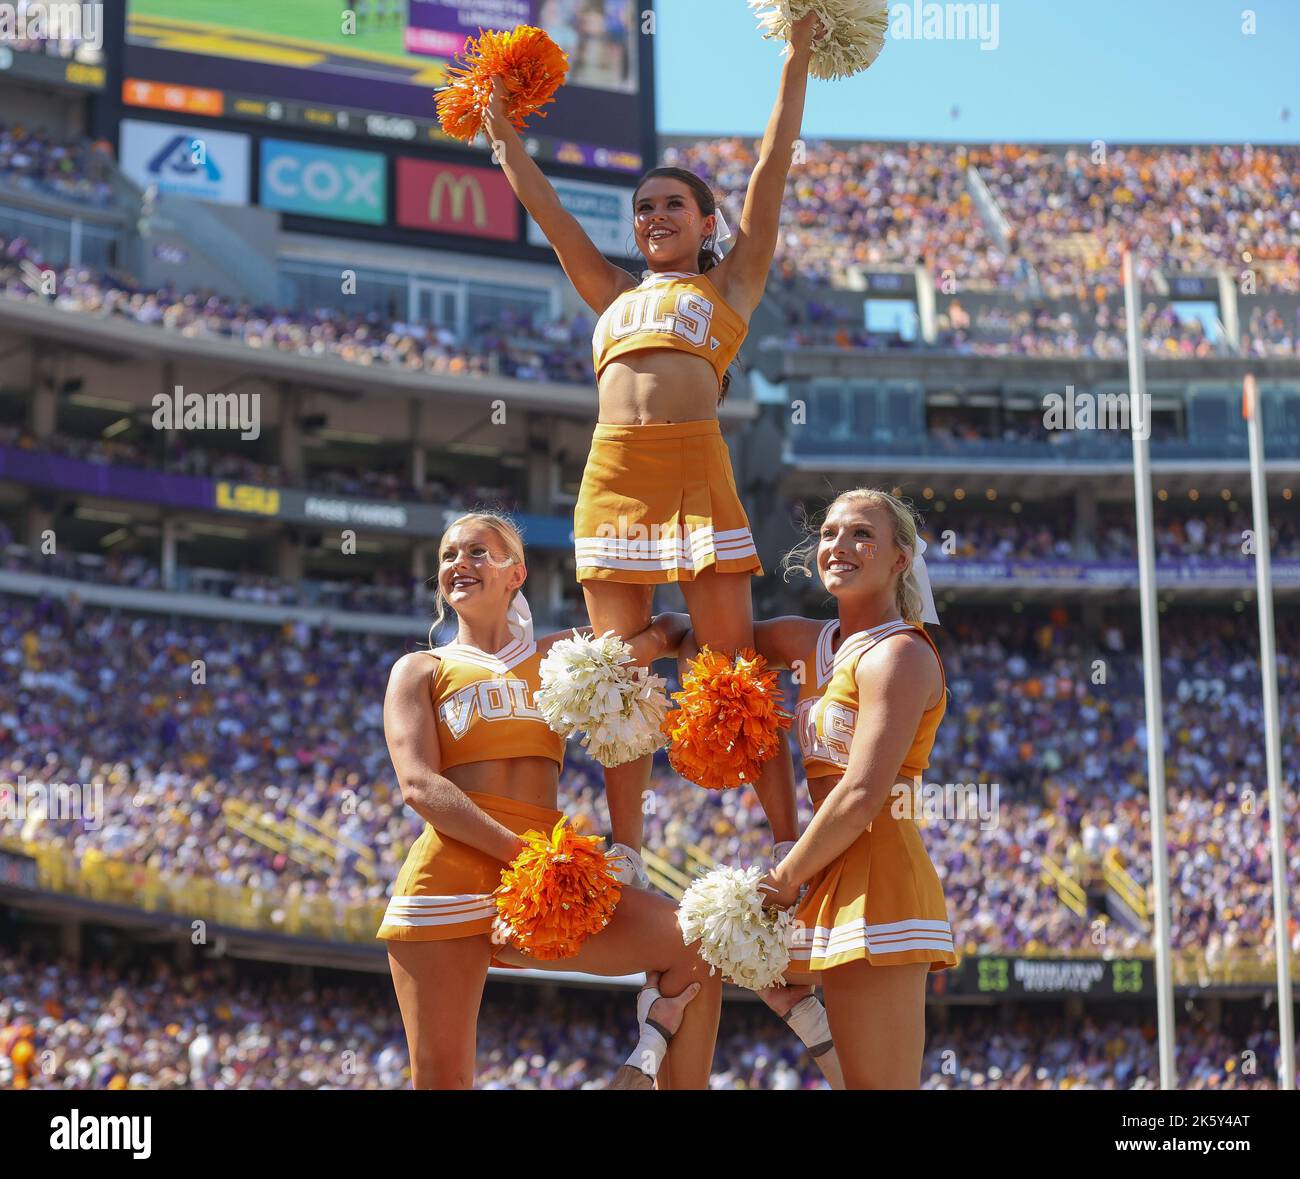 Baton Rouge, LA, USA. 8th Oct, 2022. The Tennessee cheerleaders perform in front of the Volunteer fans during the NCAA football game between the Tennessee Volunteers and LSU Tigers at Tiger Stadium in Baton Rouge, LA. Kyle Okita/CSM/Alamy Live News Stock Photo